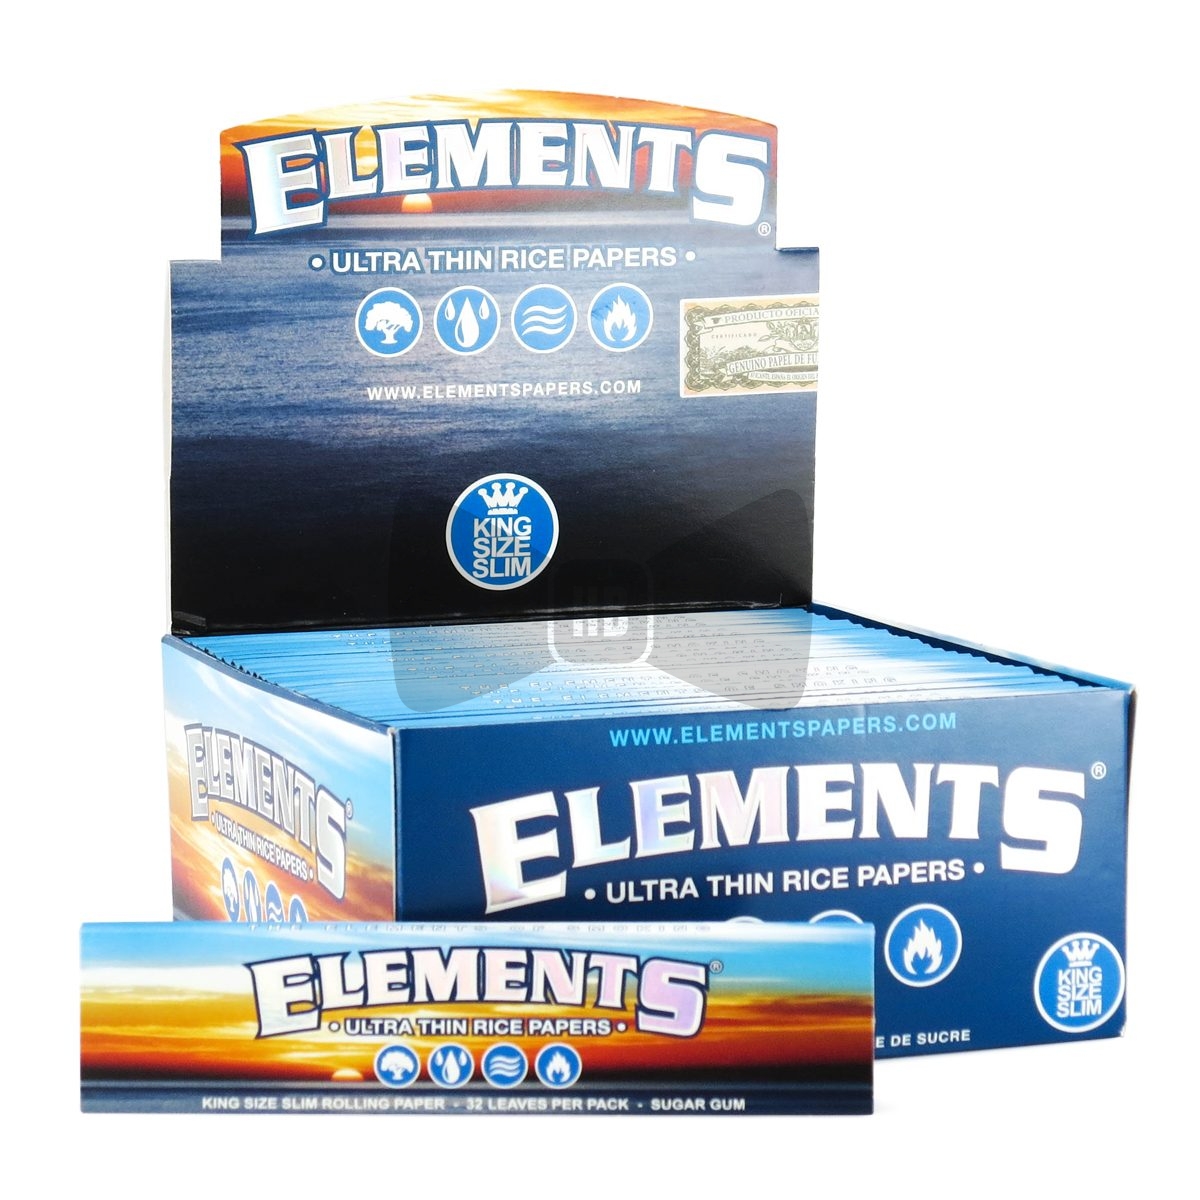 *Elements Ultra Rice 50ct. King size Slim Papers EL4